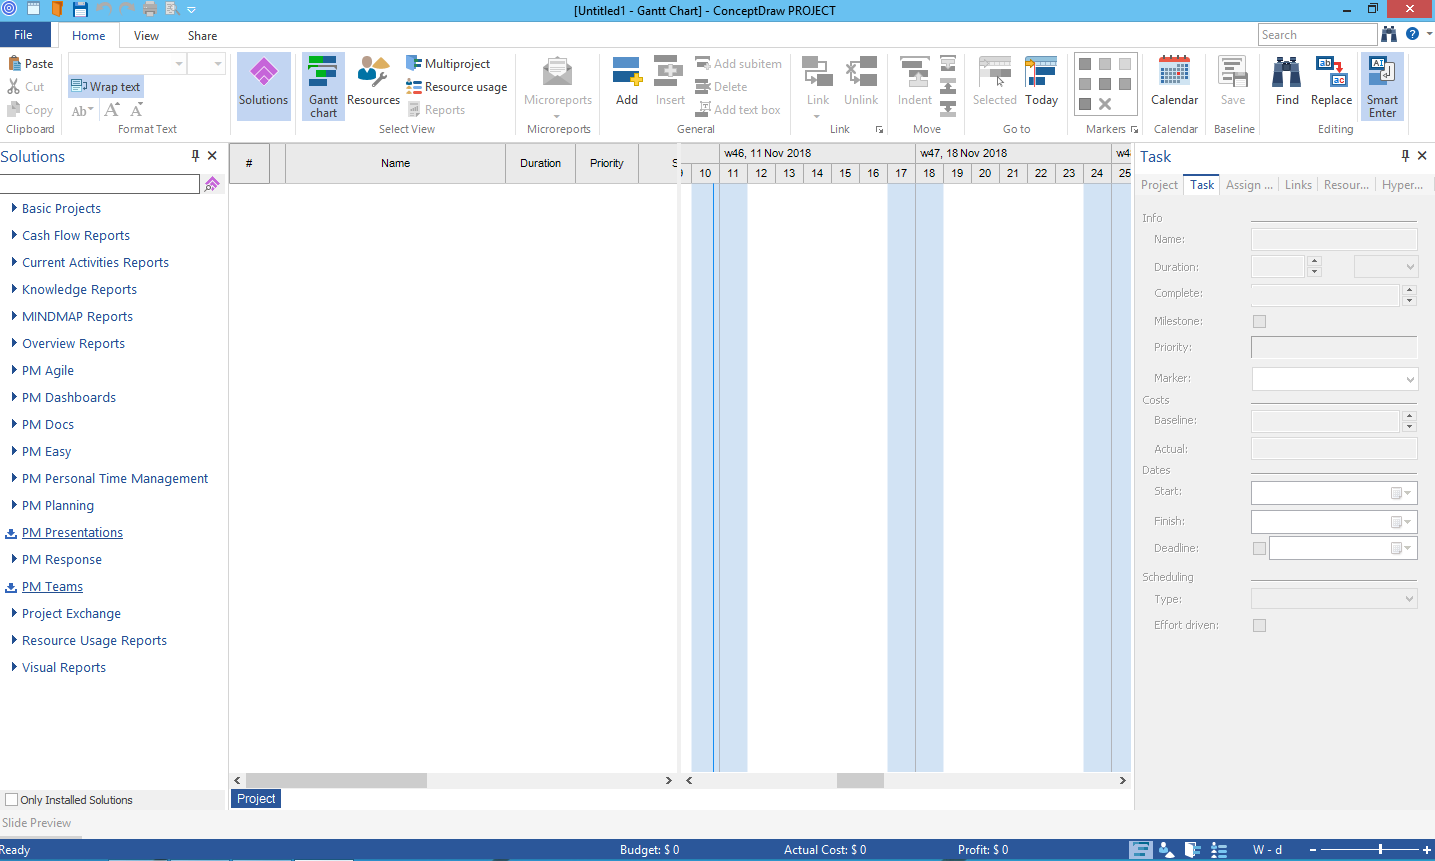 conceptdraw office 8.0.3